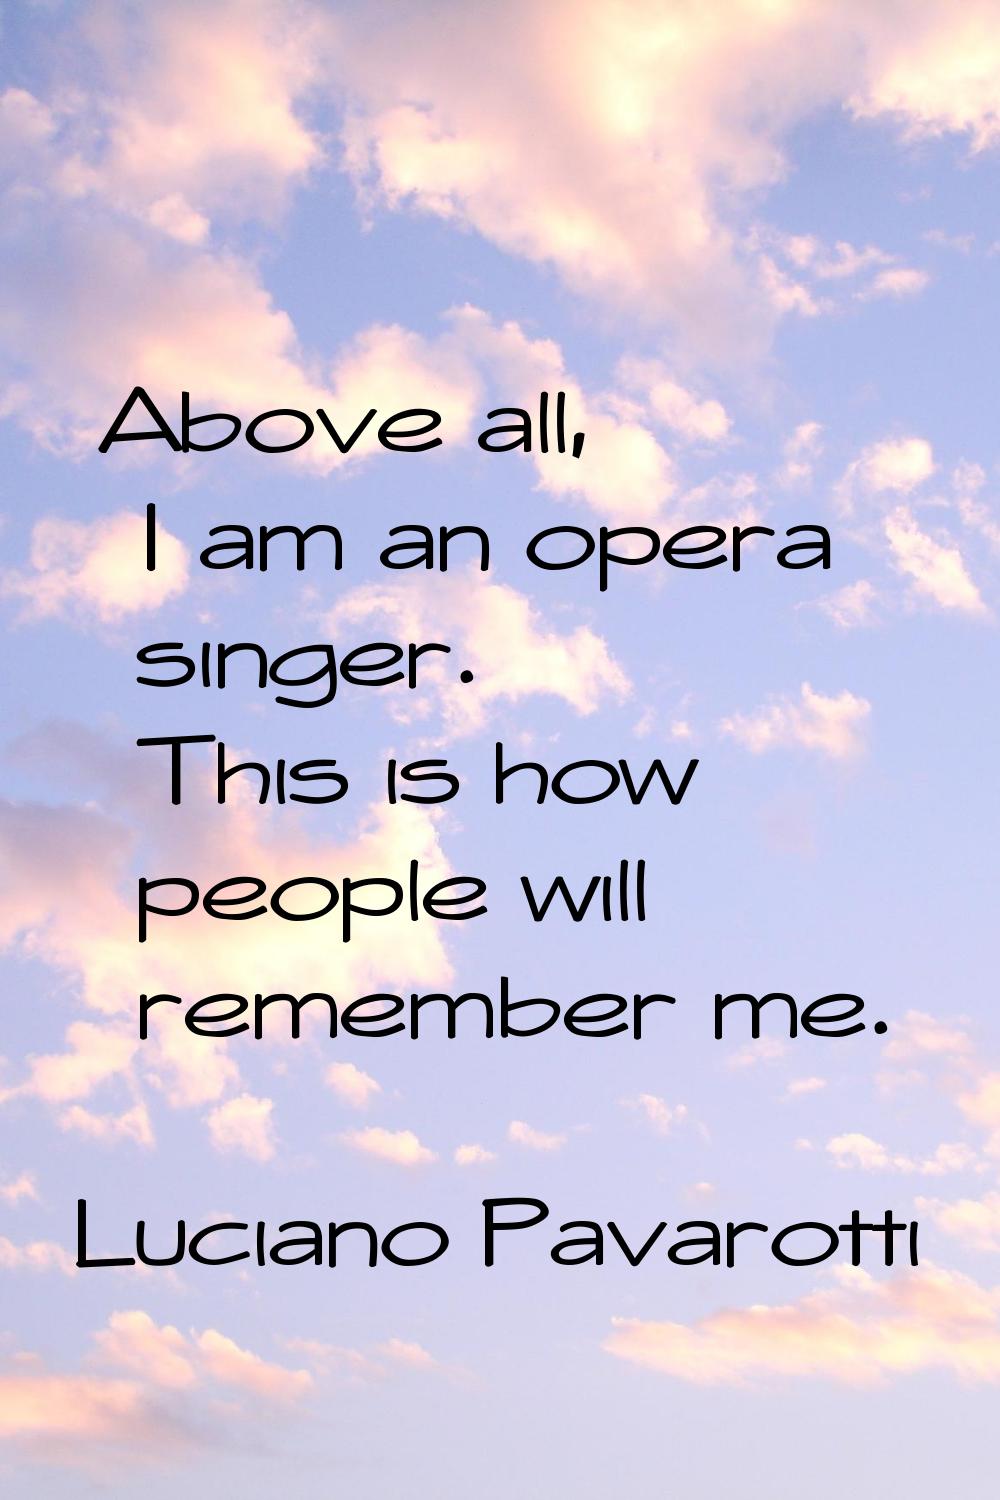 Above all, I am an opera singer. This is how people will remember me.